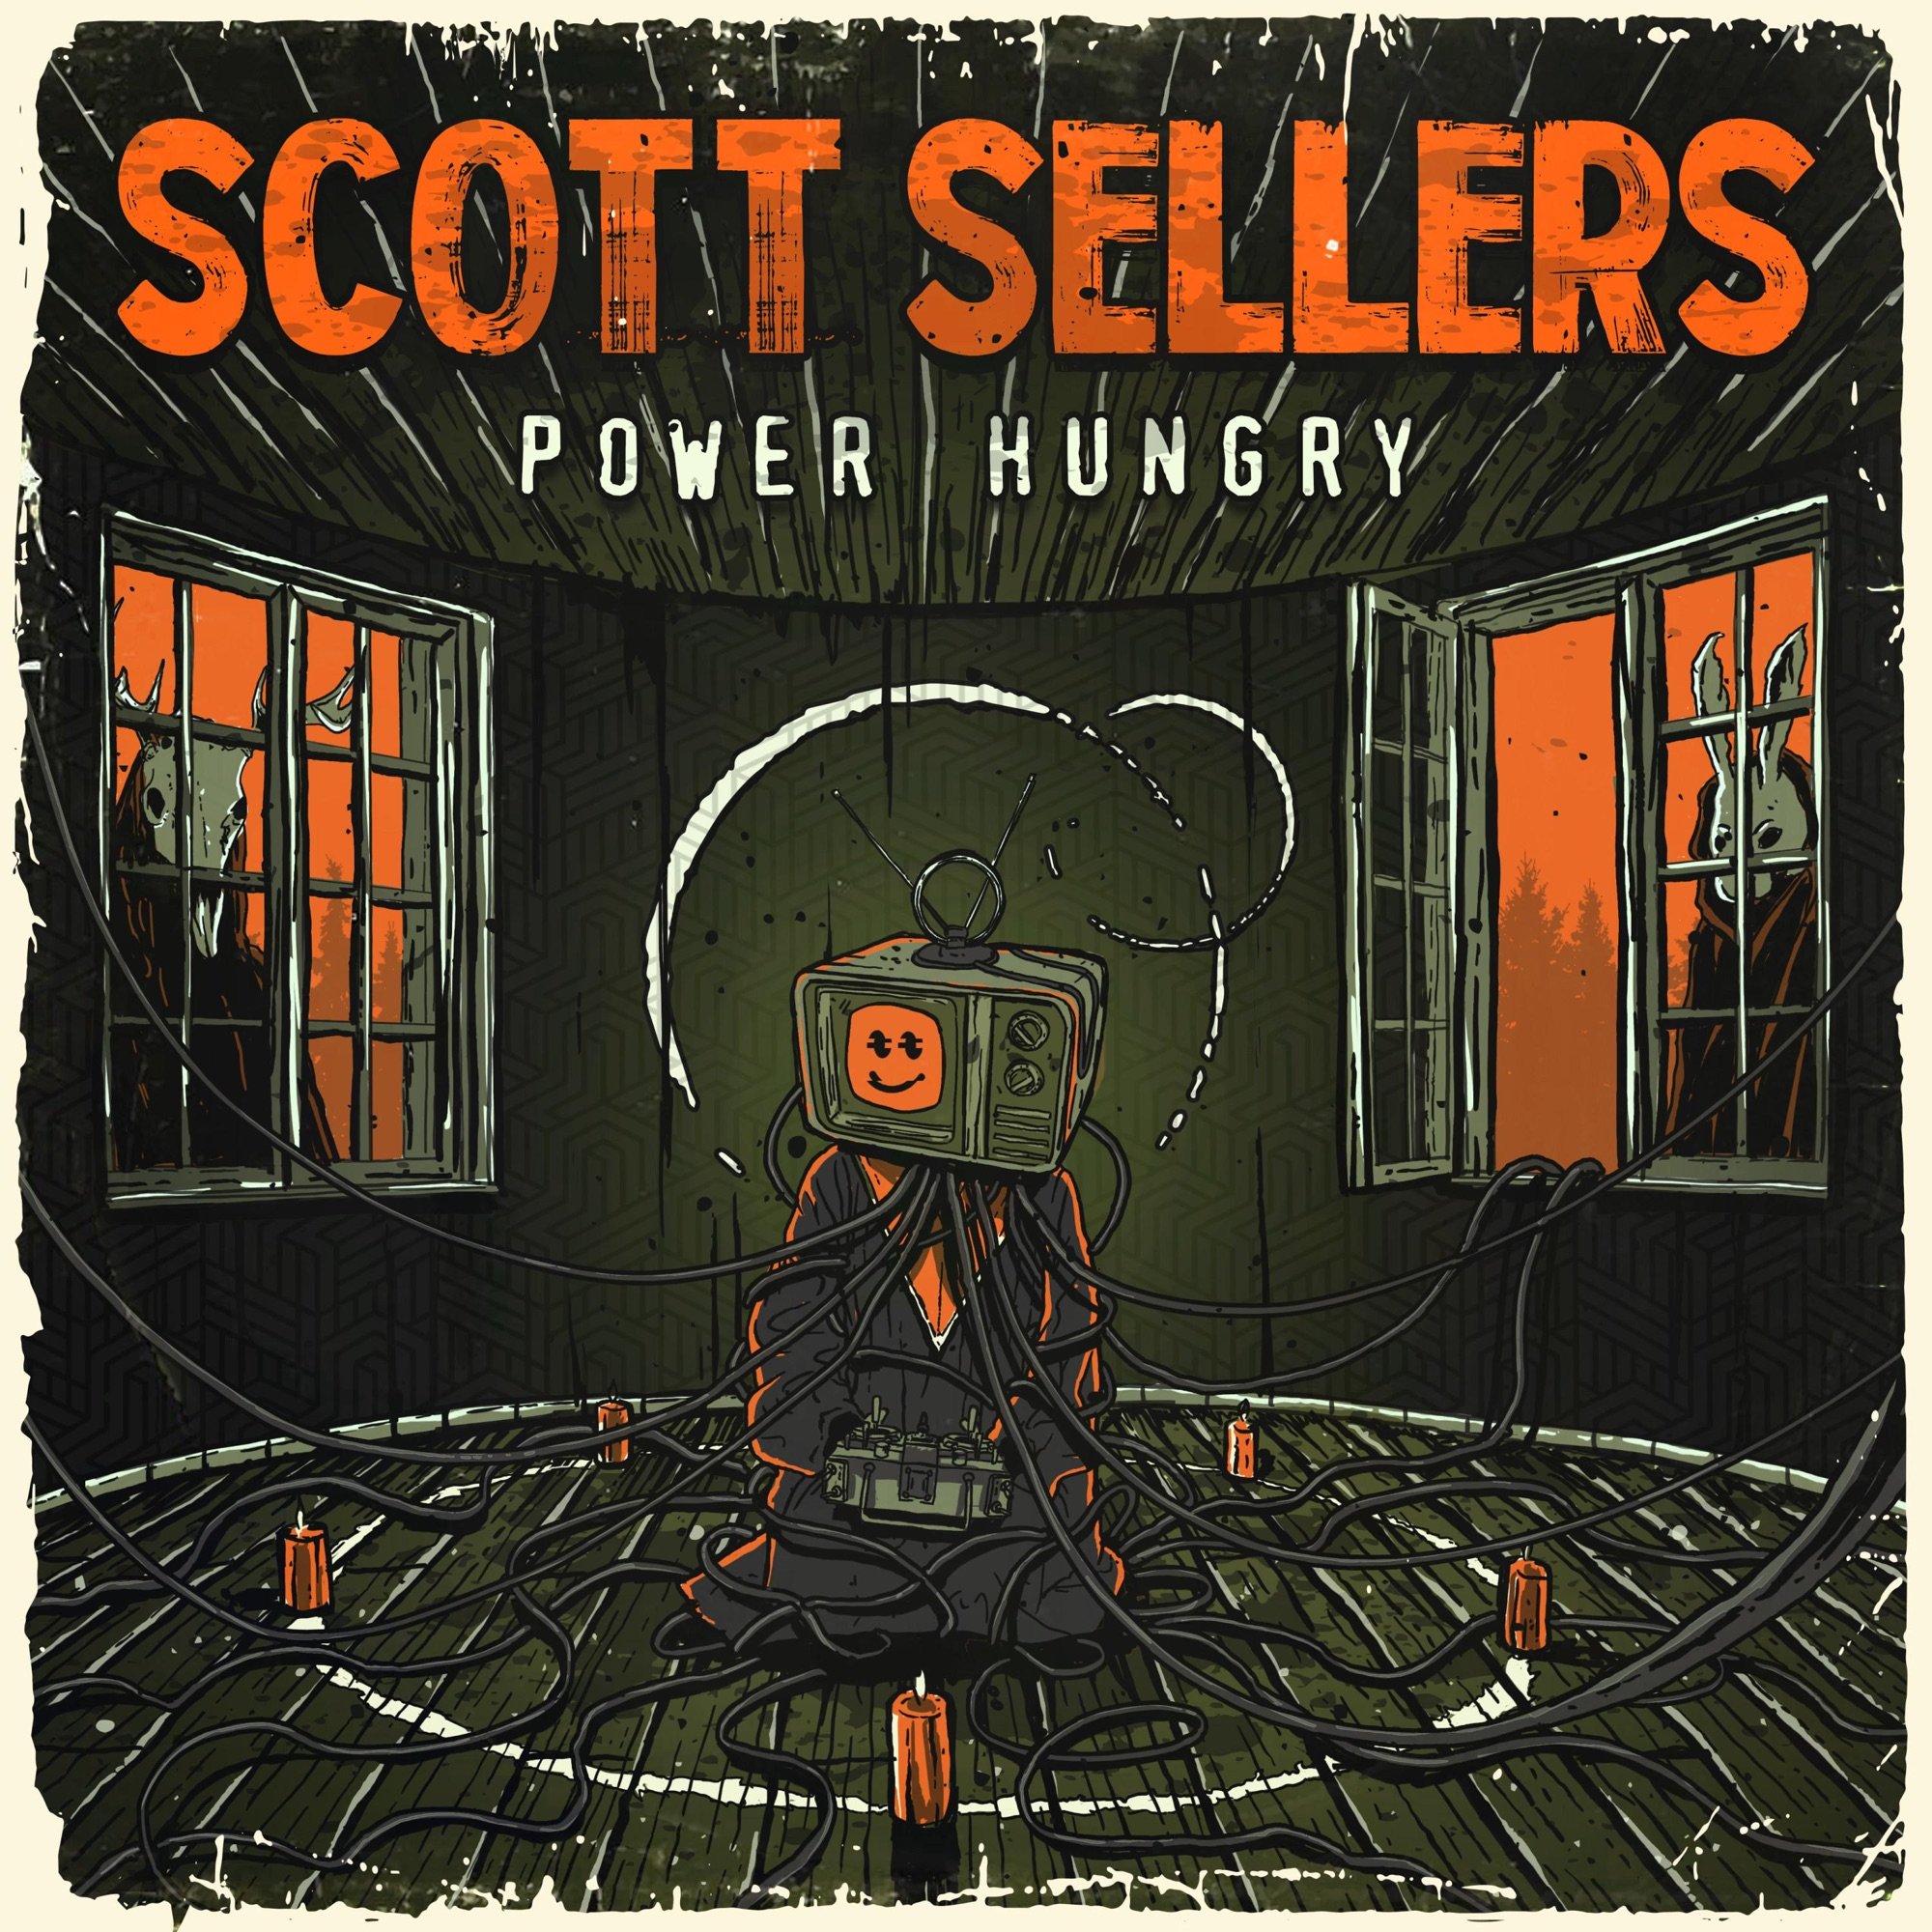 Scott Sellers - Power Hungry (2019) FLAC Download